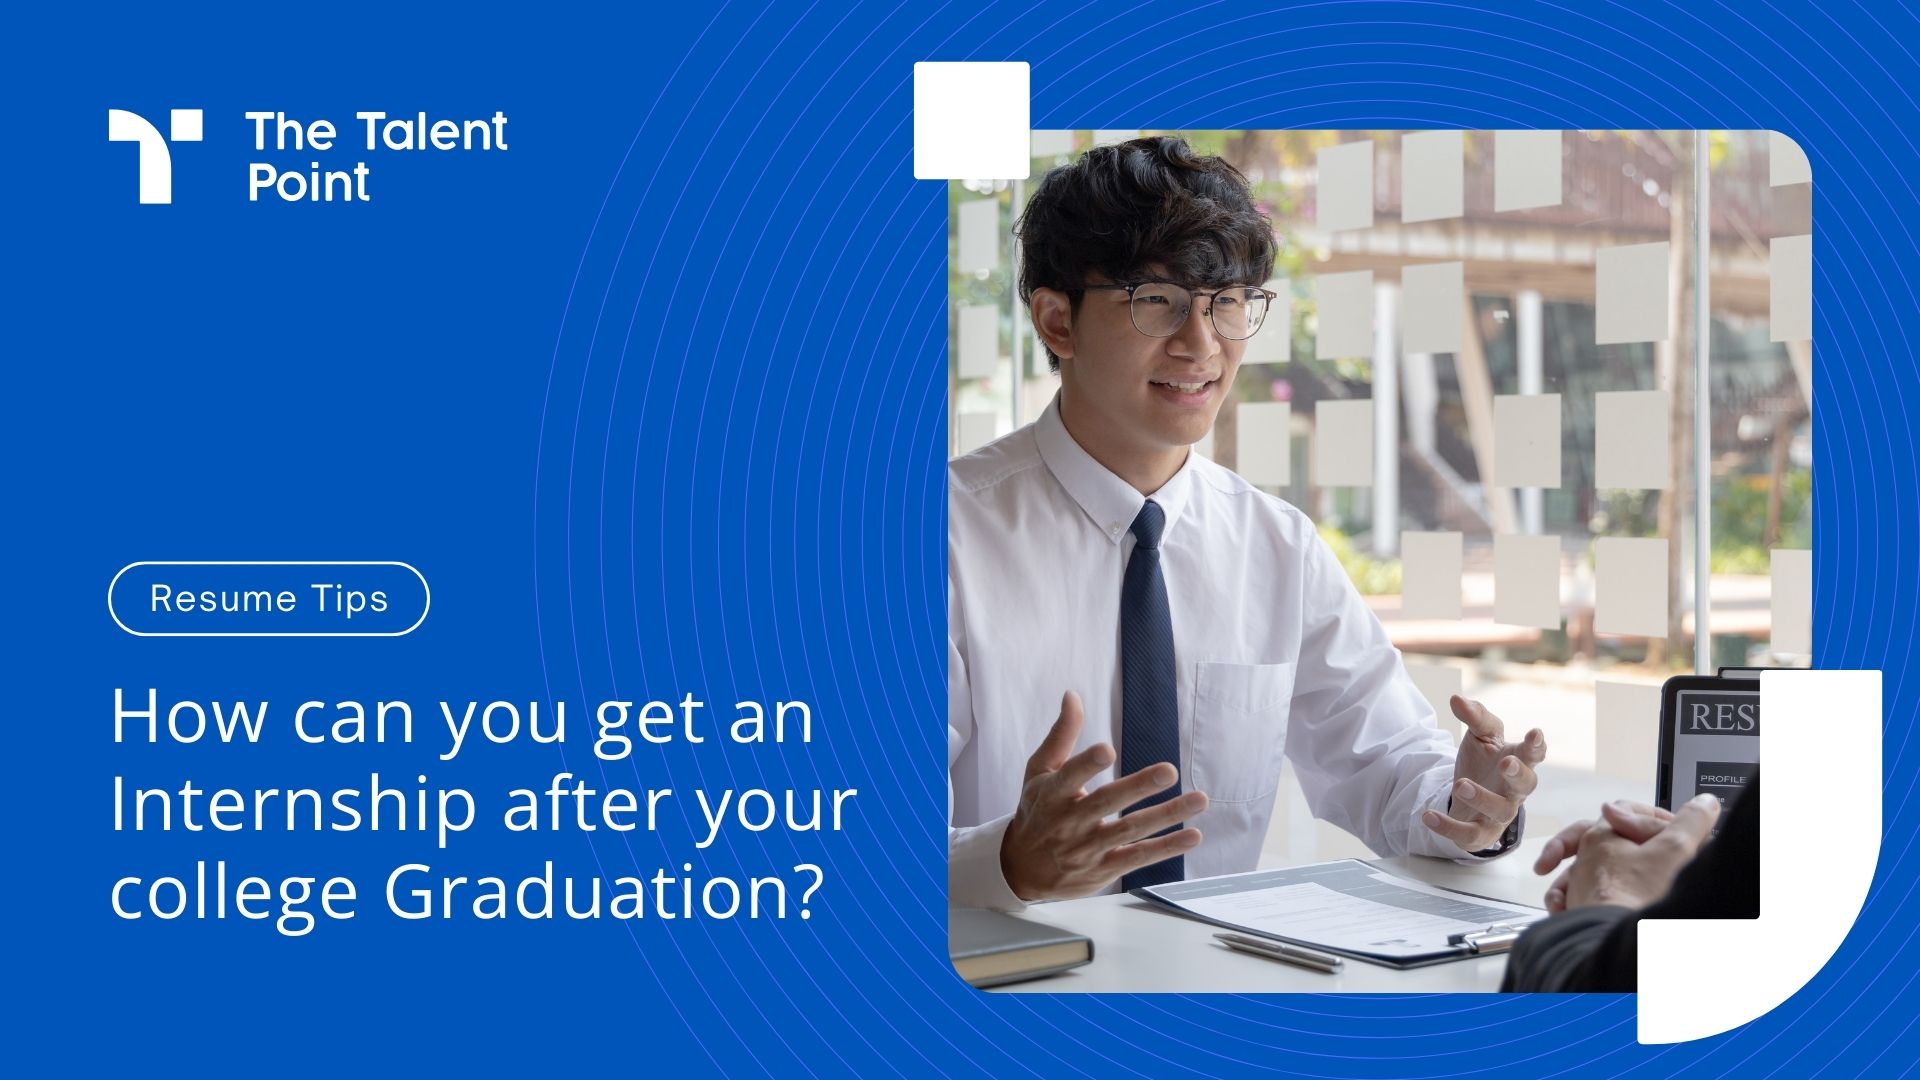 How can you get an Internship after your college Graduation? - TalentPoint